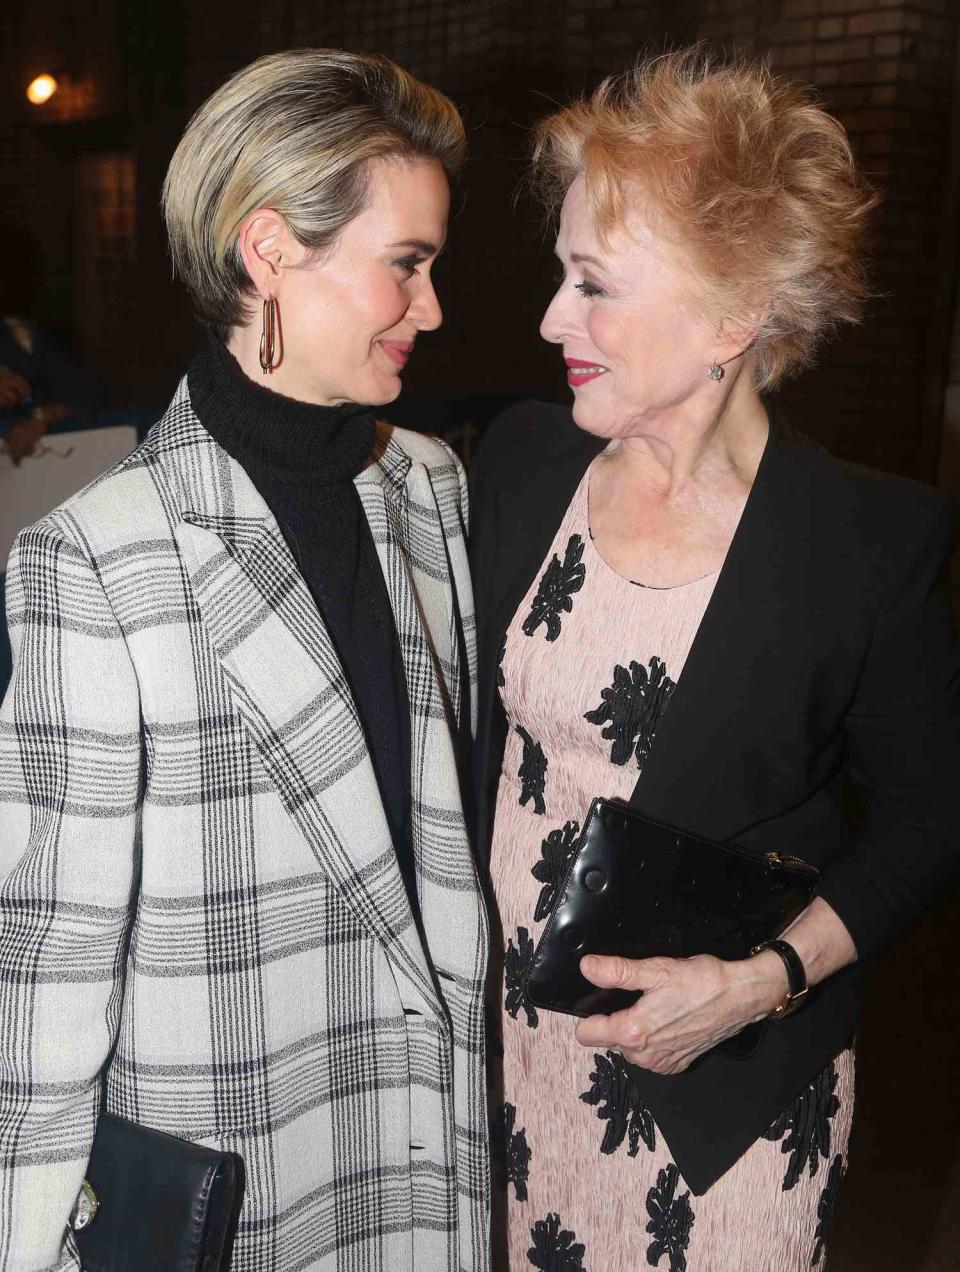 Sarah Paulson and girlfriend Holland Taylor pose at The Opening Night of "The Front Page" on Broadway at The Broadhurst Theatre on October 20, 2016 in New York City